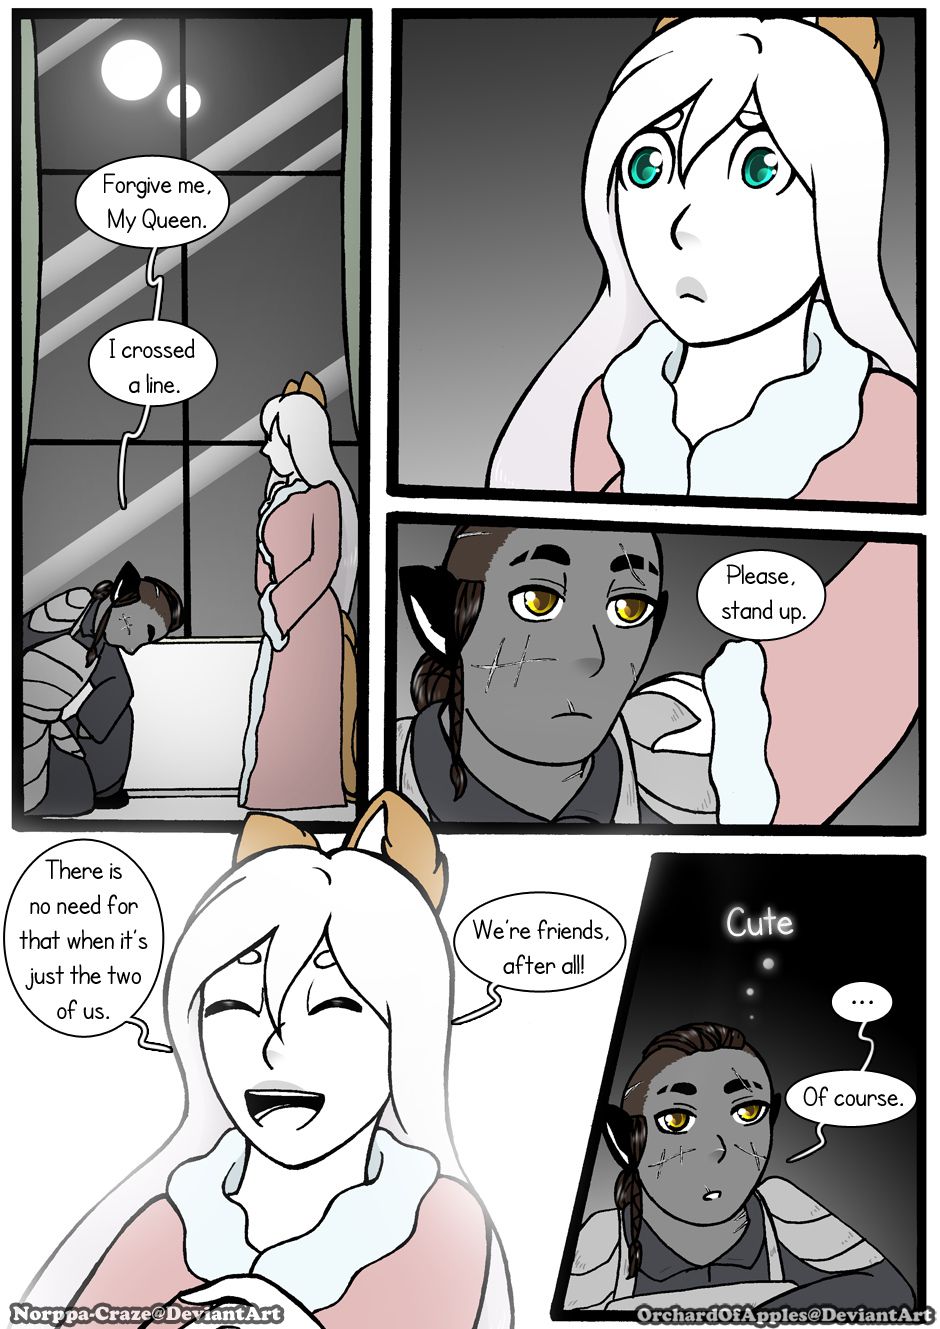 [Jeny-jen94] Between Kings and Queens [Ongoing] 316